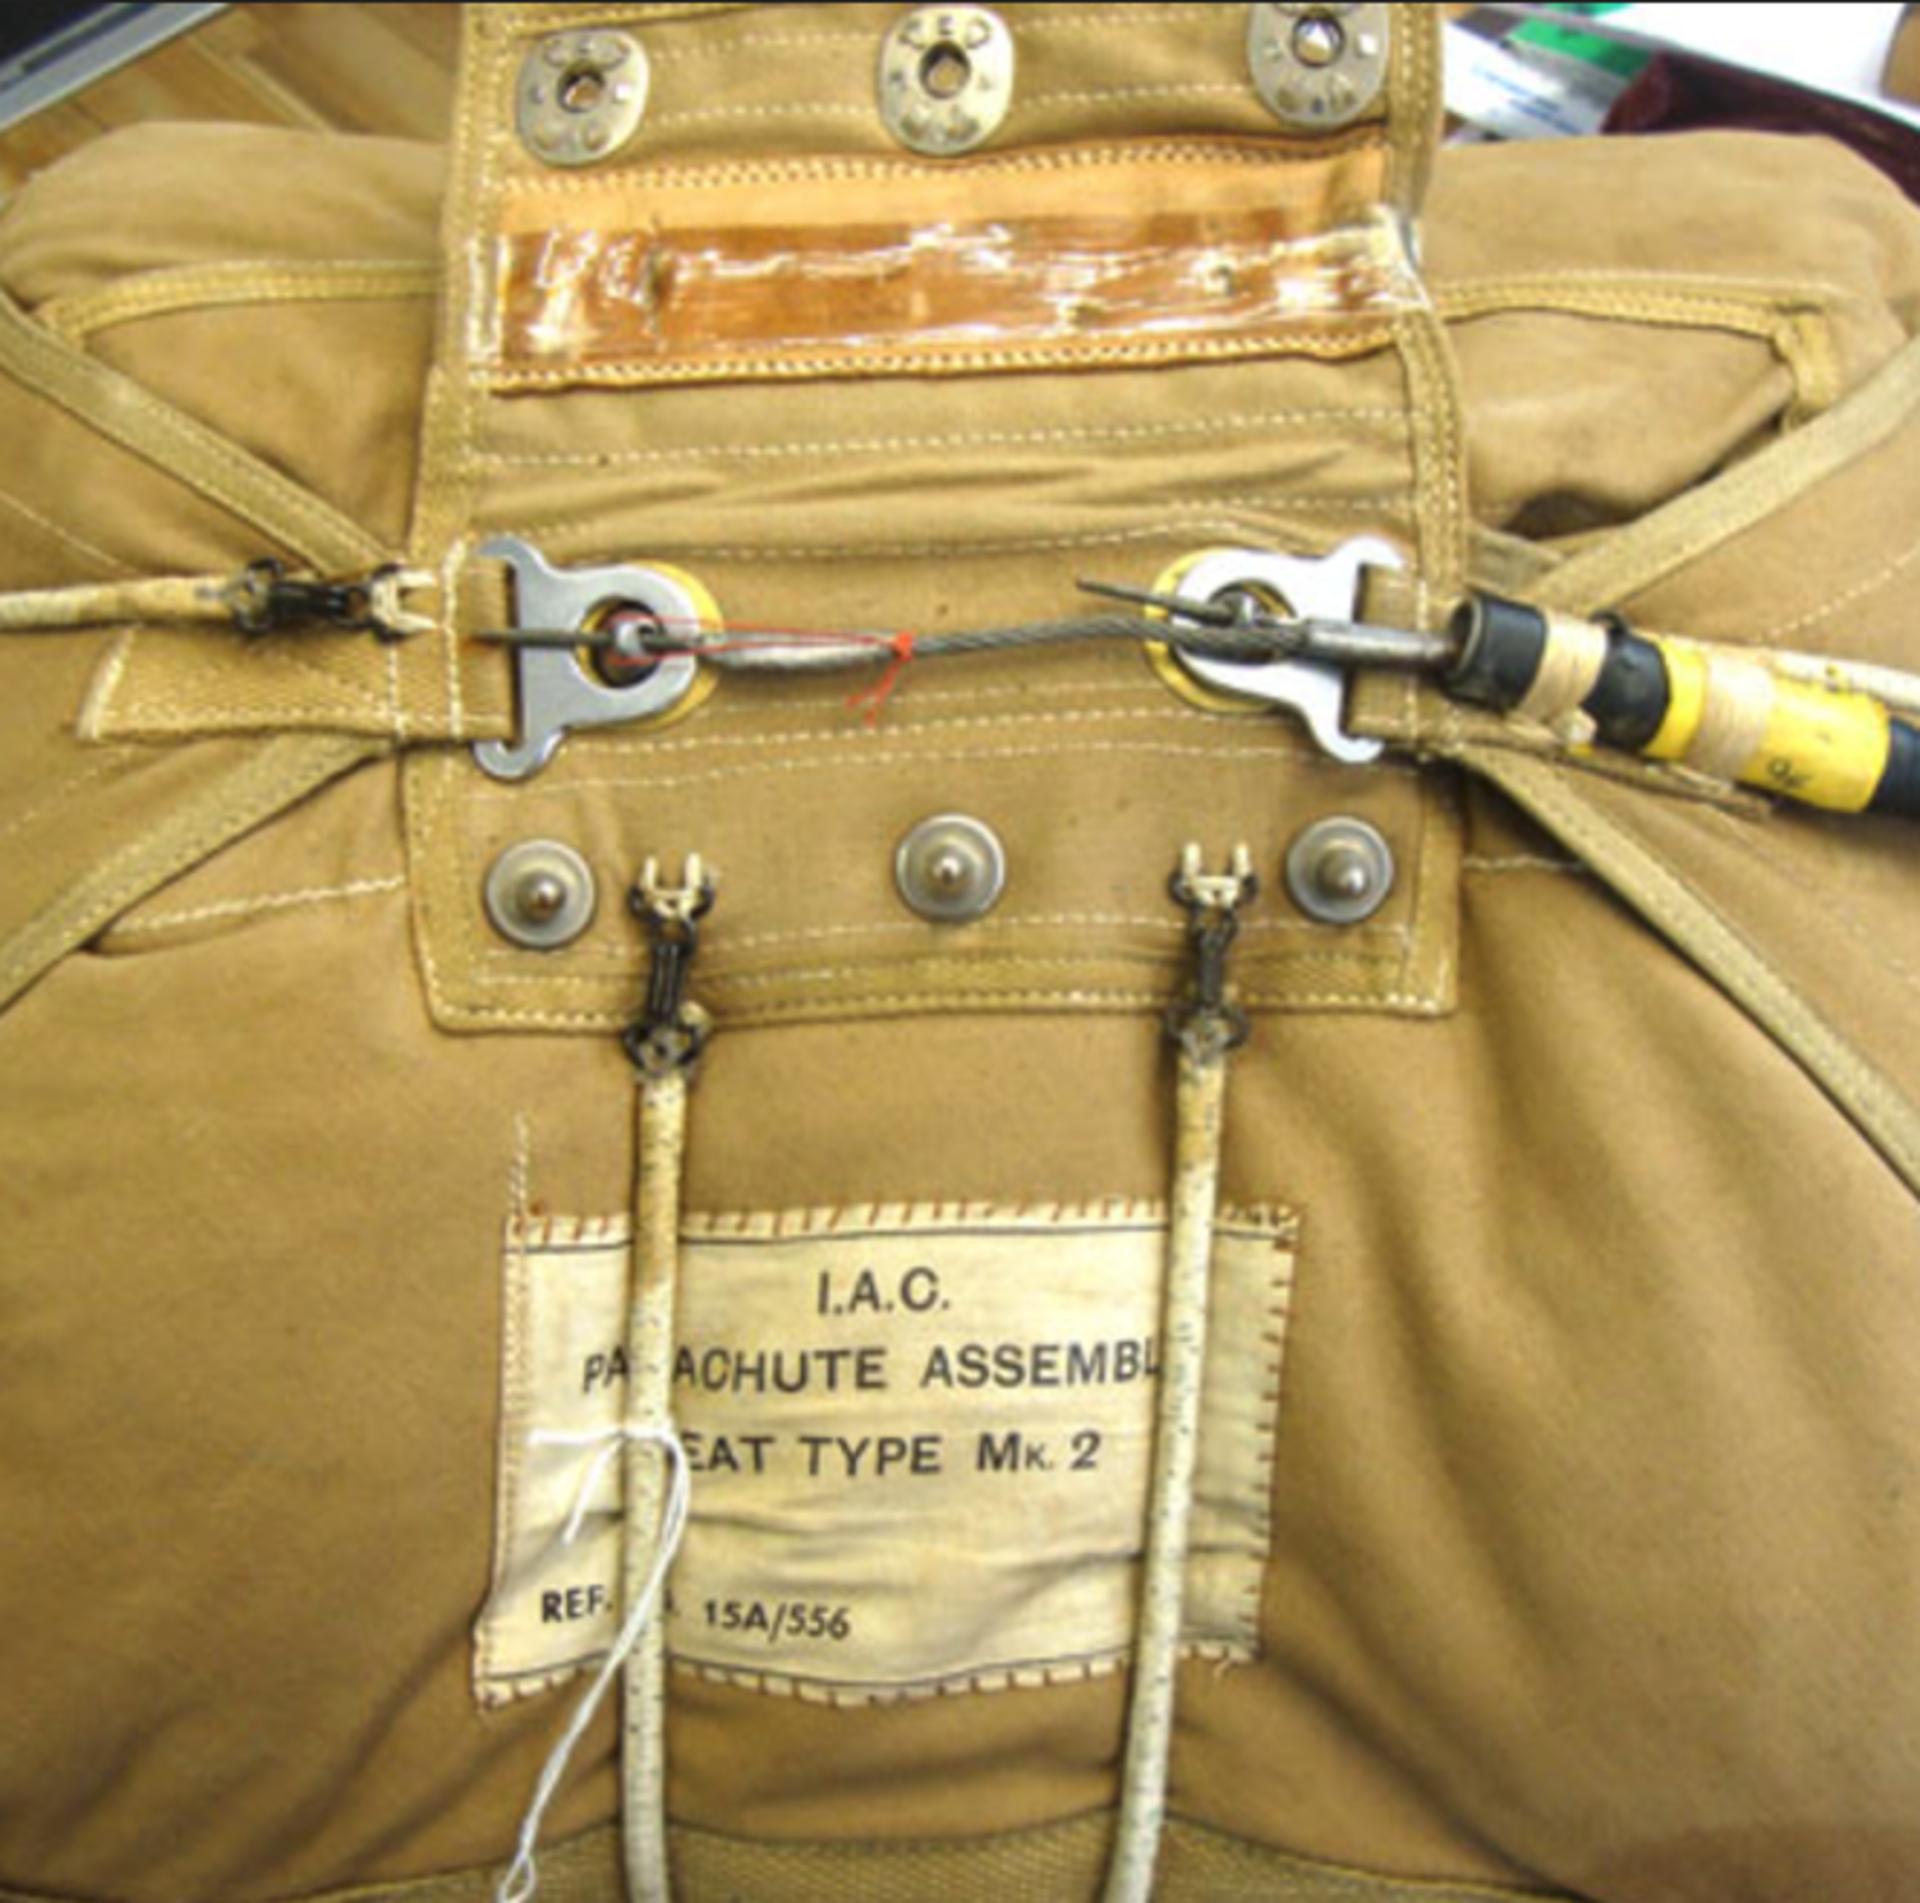 An Irving Air Chute Parachute Assembly Seat Type Mk.2. With MK I Back Pad - Image 2 of 3